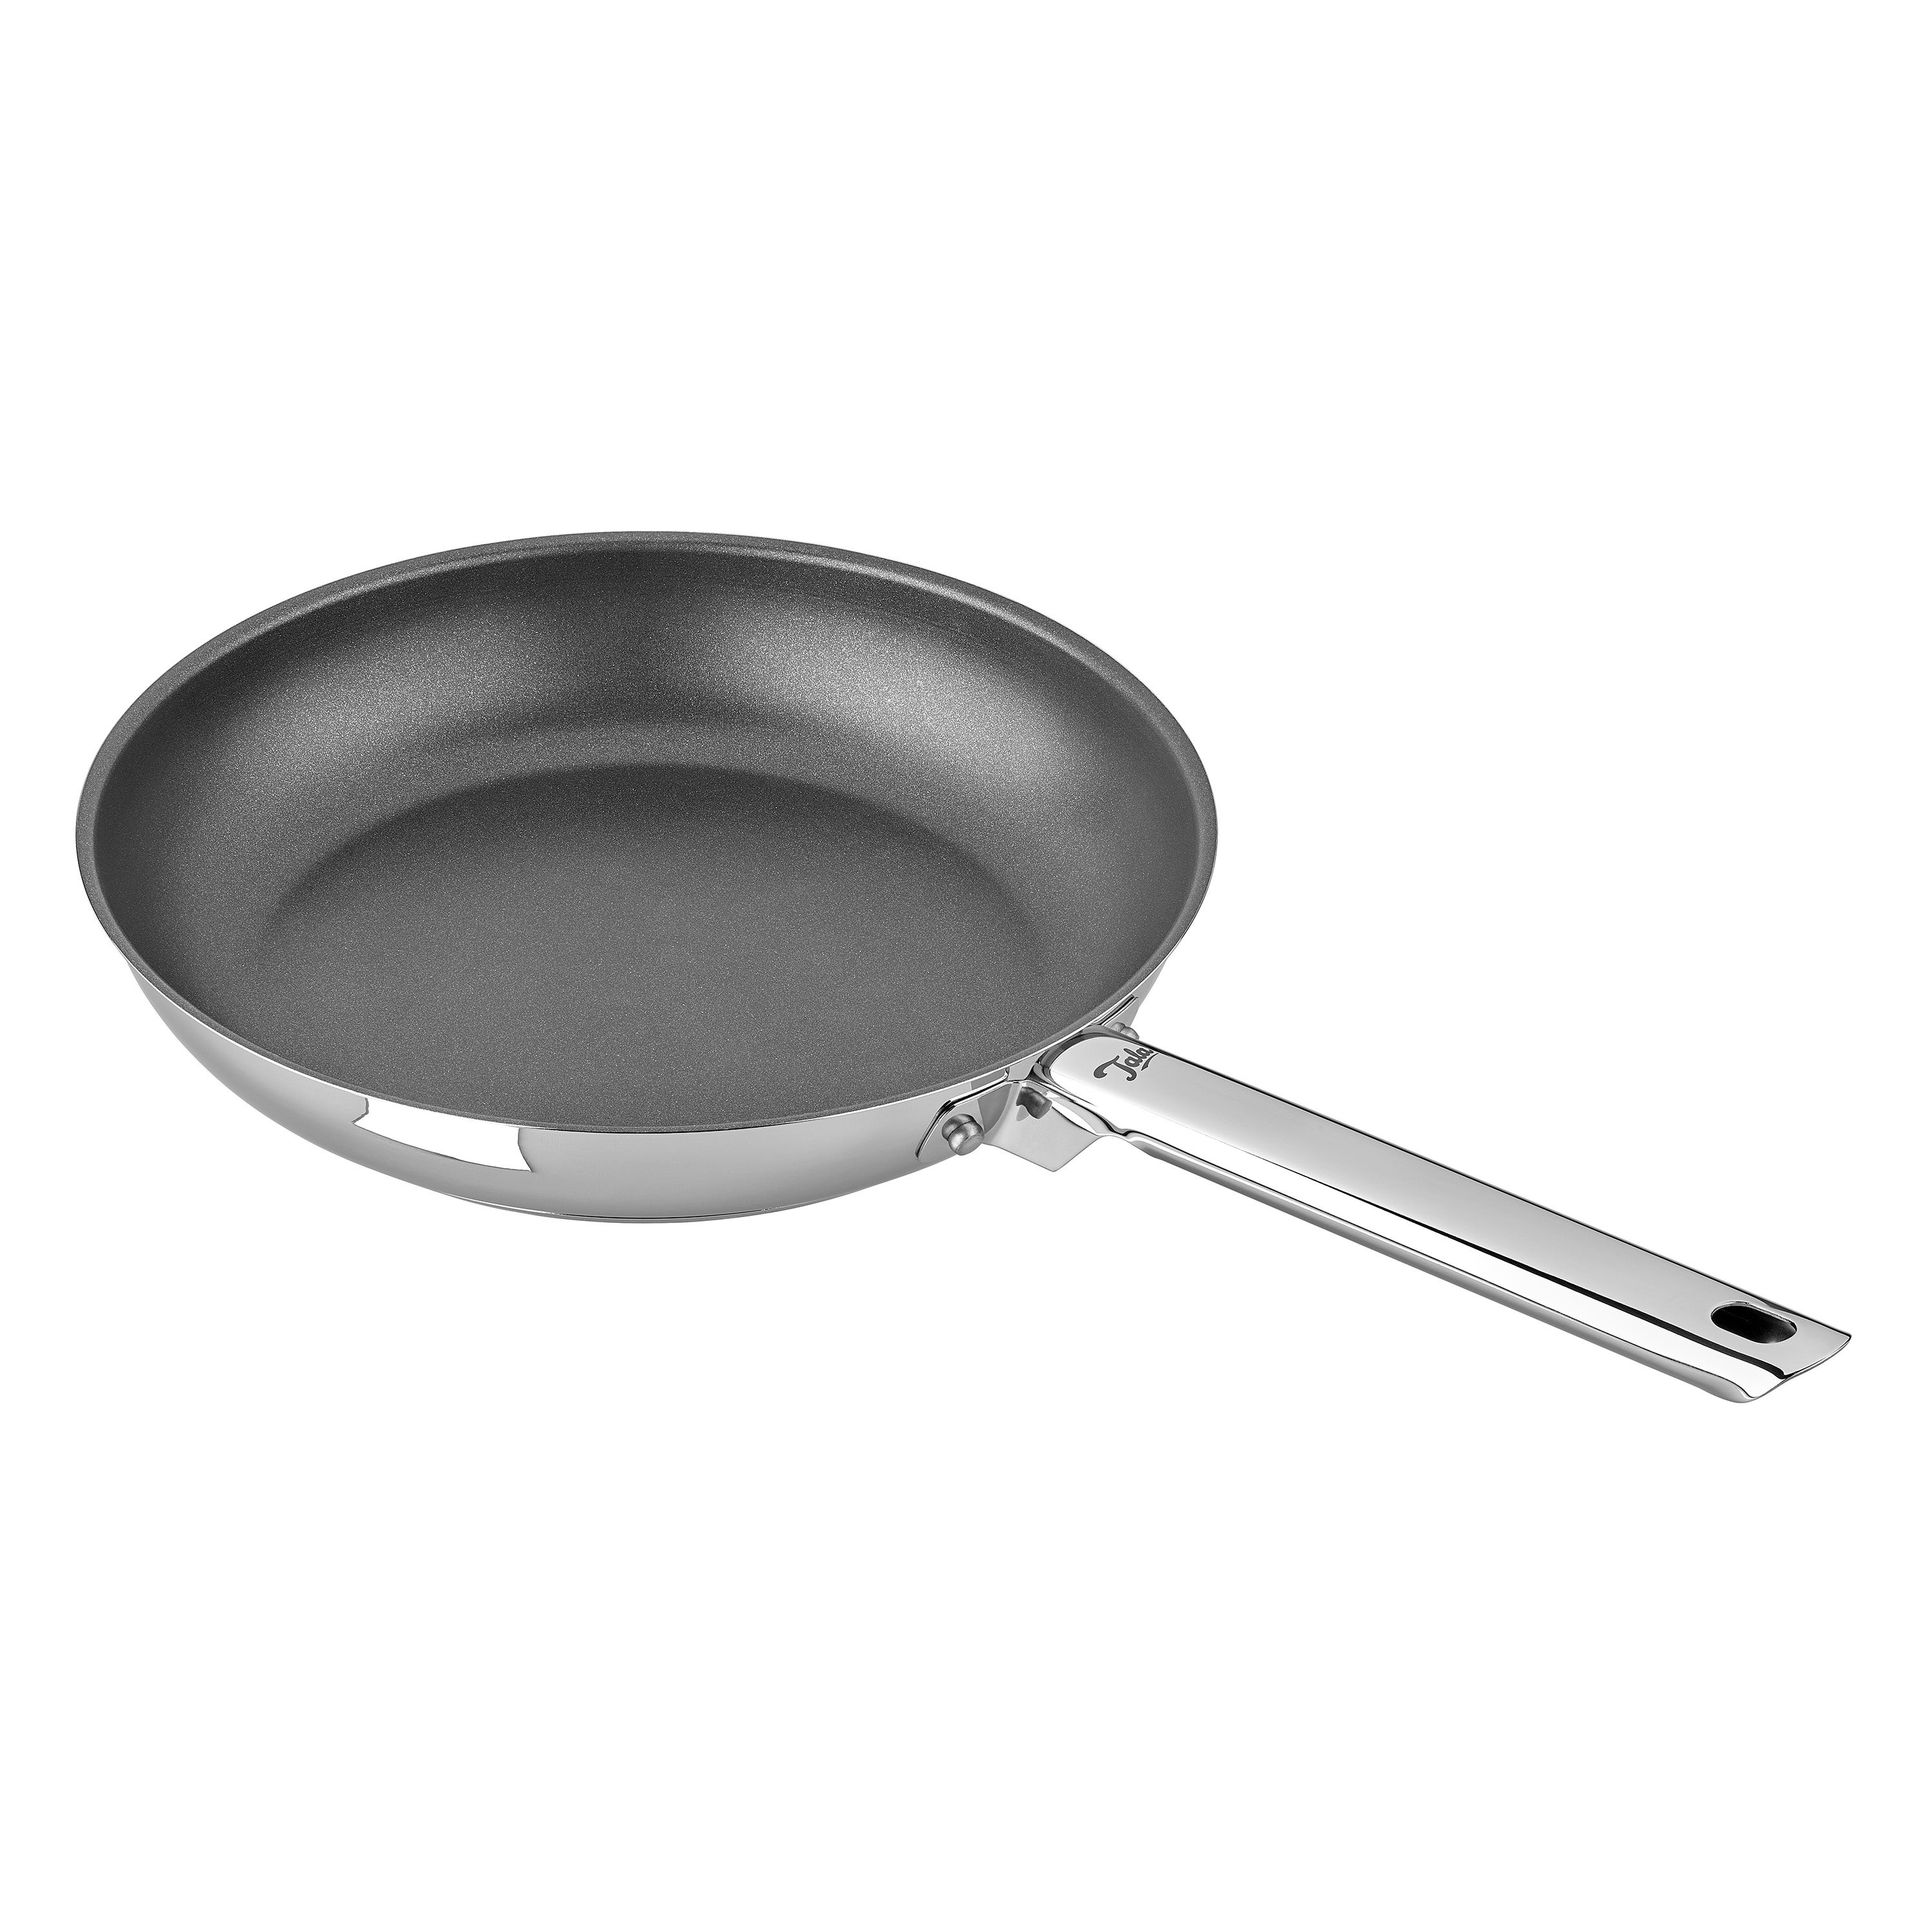 Tala Performance Superior Non-Stick Stainless Steel Frying Pan, 26cm